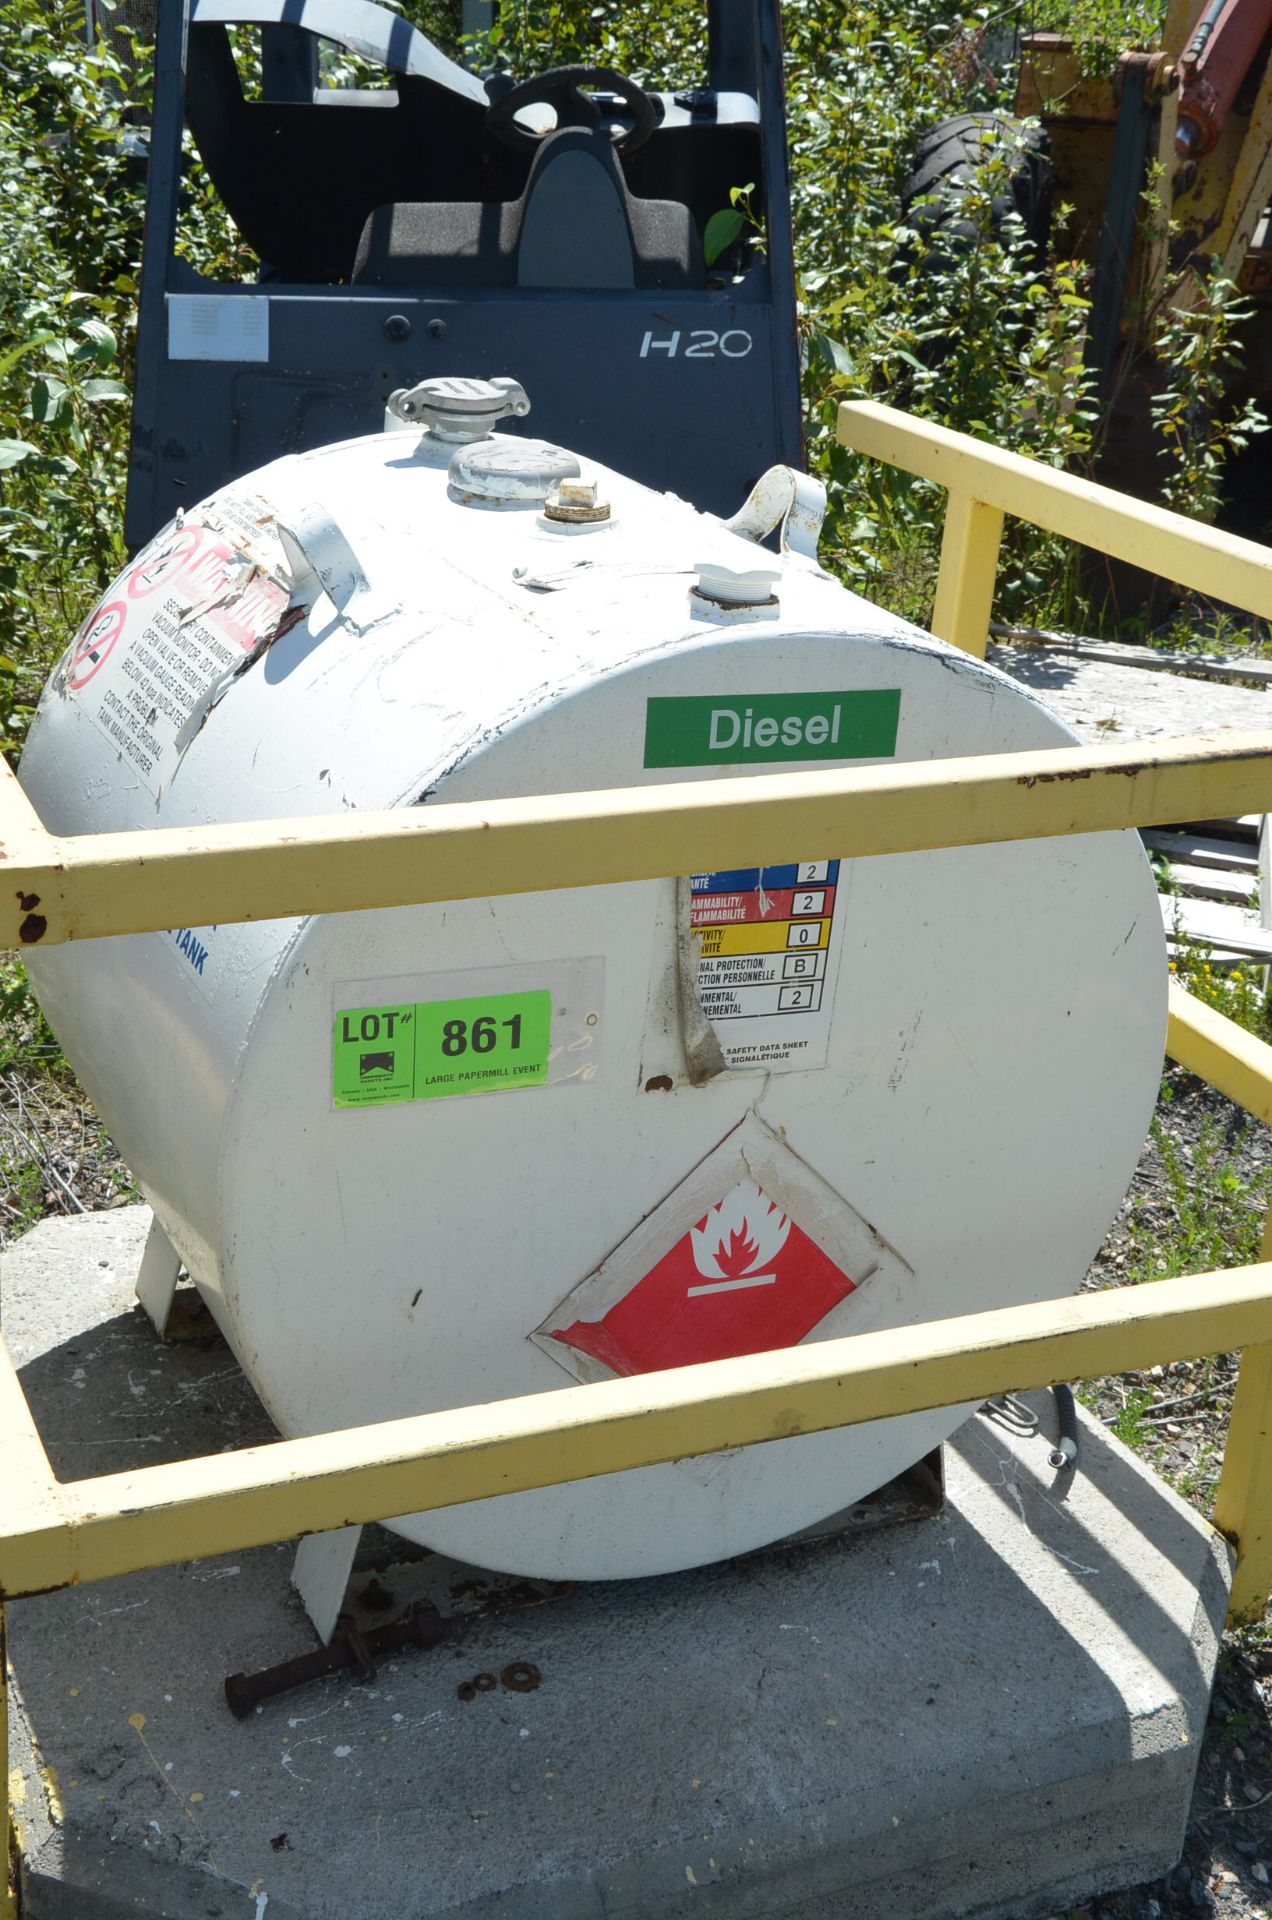 WESTEEL FUEL CUBE PORTABLE FUEL TANK, S/N N/A [RIGGING FEES FOR LOT #861 - $175 USD PLUS